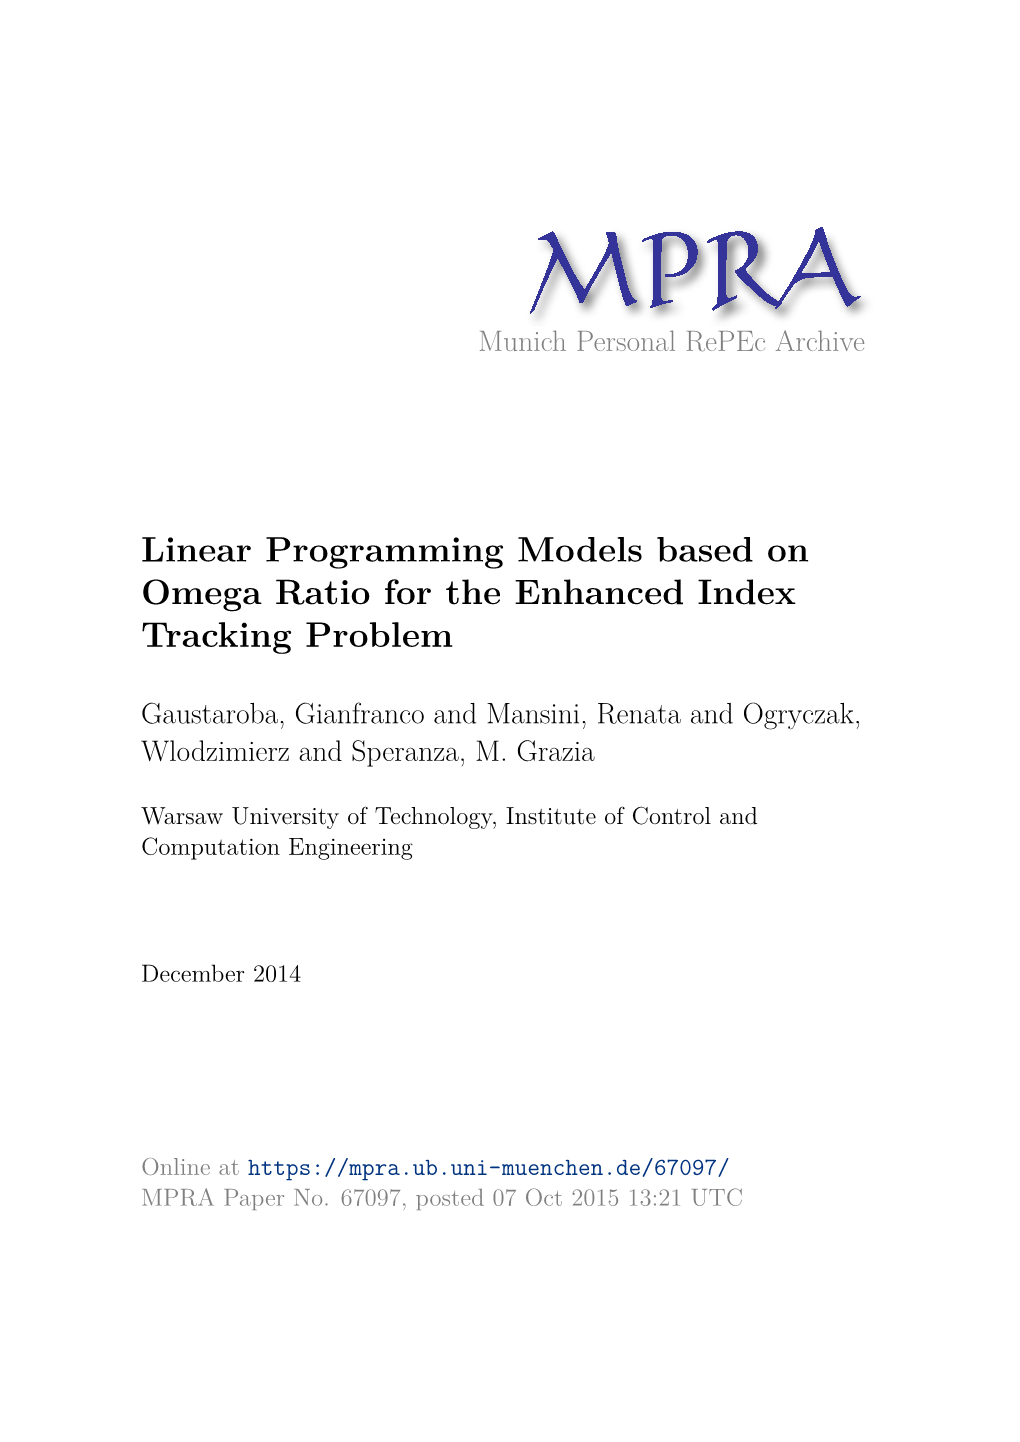 Linear Programming Models Based on Omega Ratio for the Enhanced Index Tracking Problem